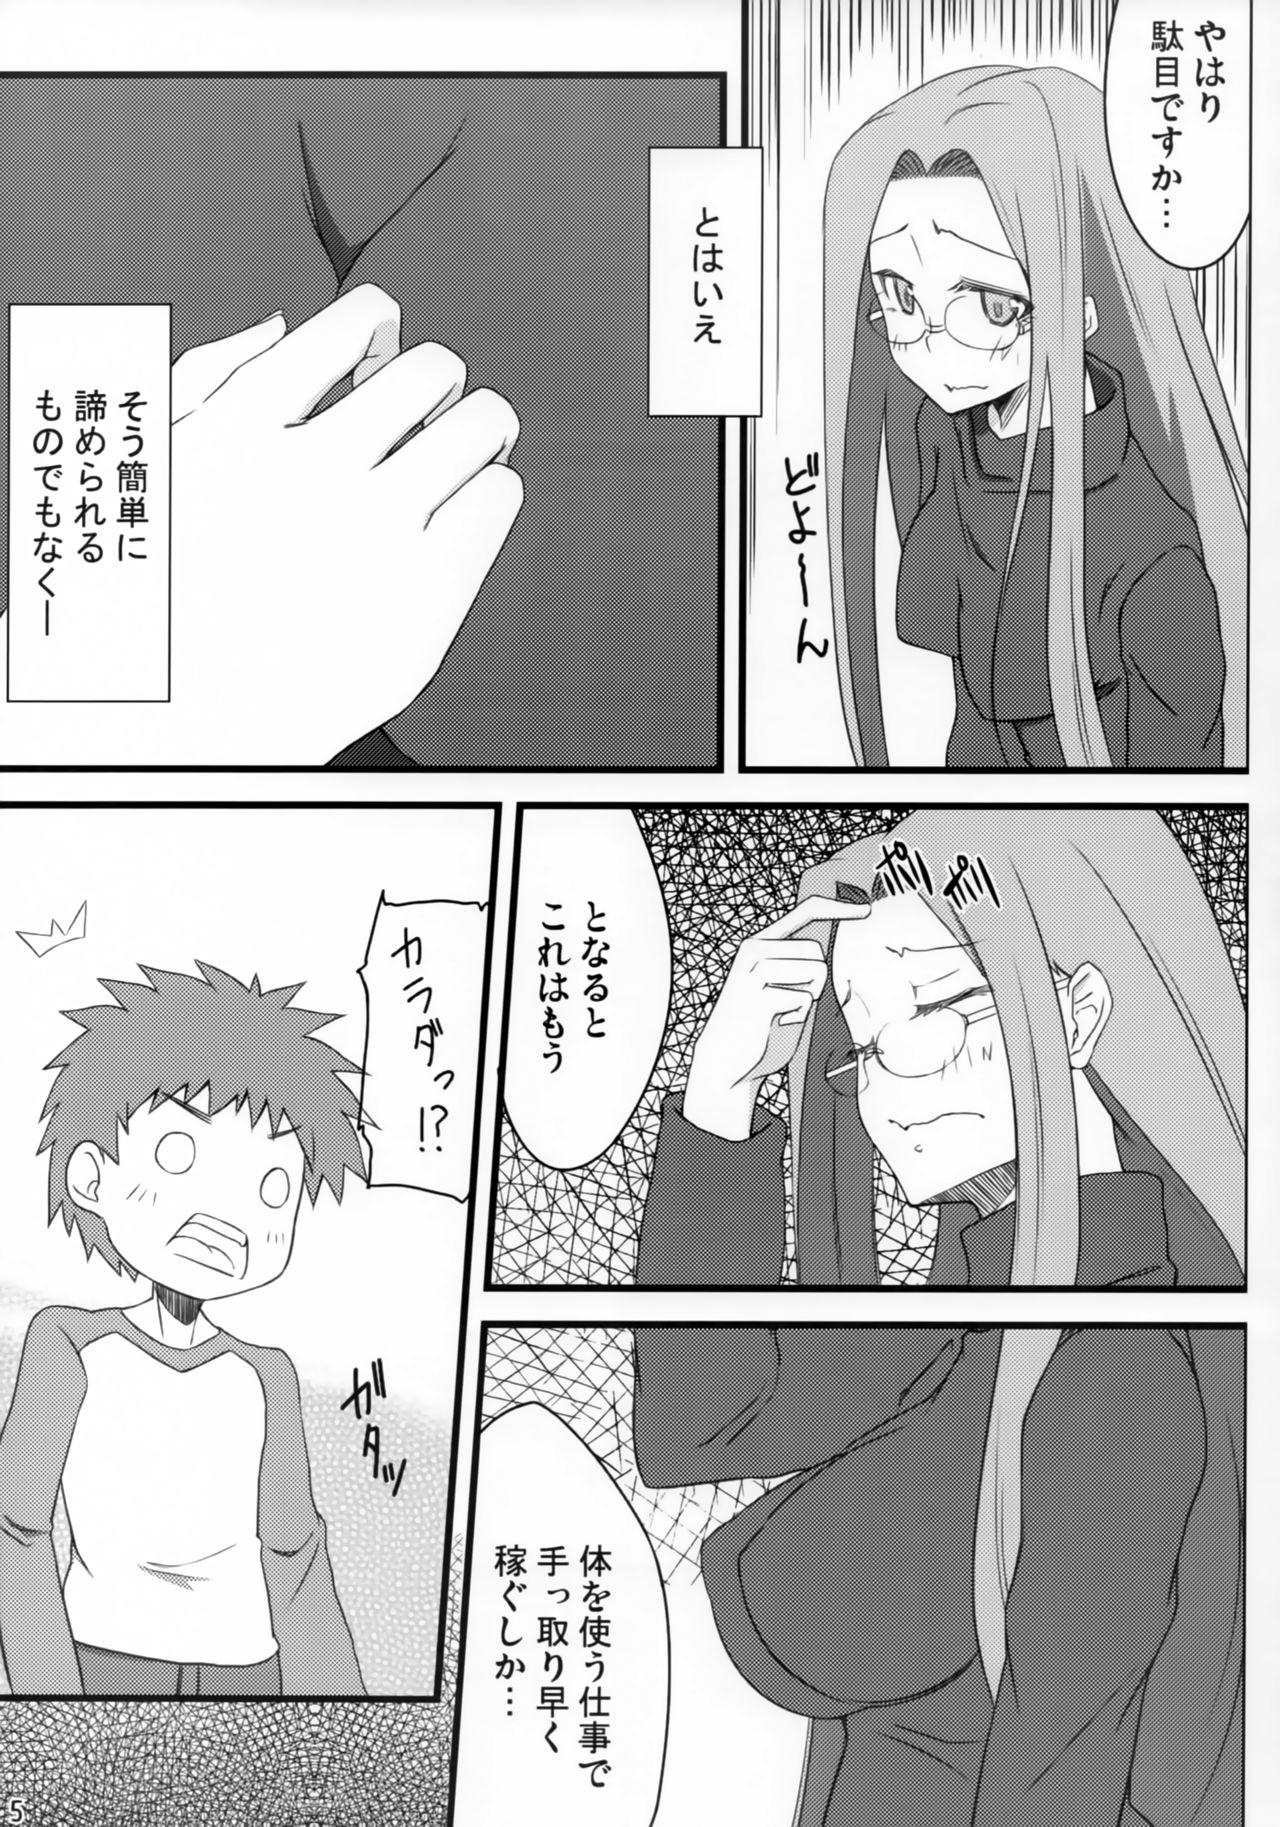 Amateur R4 - Fate stay night Rabo - Page 4